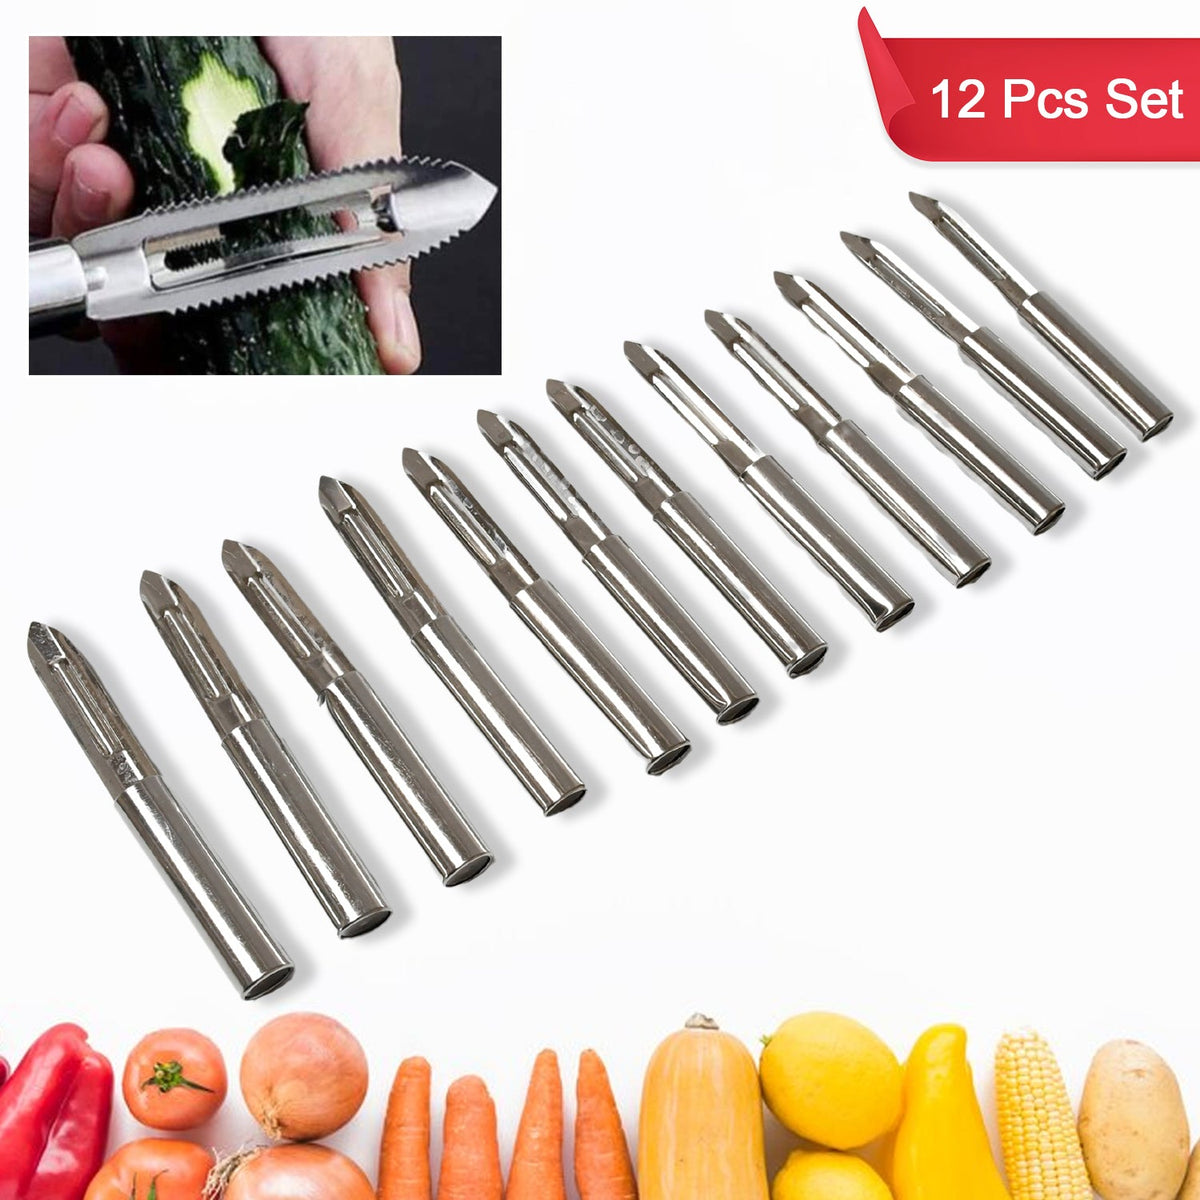 5639 Multi-Purpose Stainless Steel Peeler With Handle For Vegetables, Potato Peeler, Carrot, grated, Suitable for Peeling and shredding Fruit and Vegetables Kitchen Accessories, Piller (12 Pcs Set) 